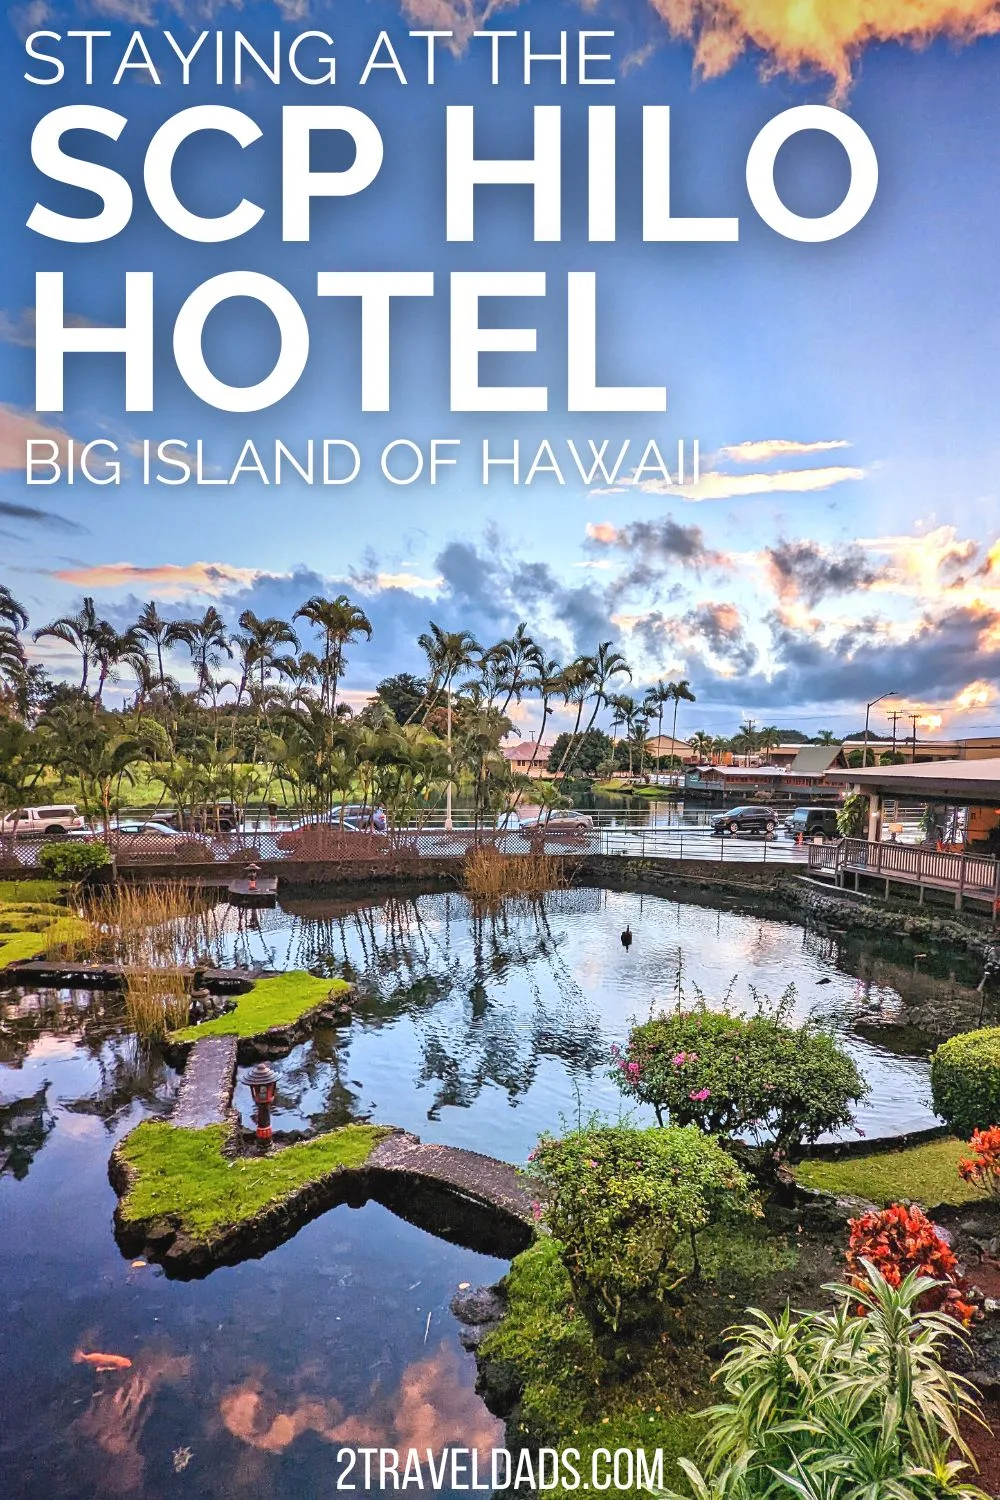 Top pick for an eco-conscious, community focused hotel on the Big Island of Hawaii, the SCP Hilo Hotel is a wonderful retreat. Located on the waterfront and near the airport, this hotel is beautiful, peaceful and a thoughtful choice when visiting Hawaii.